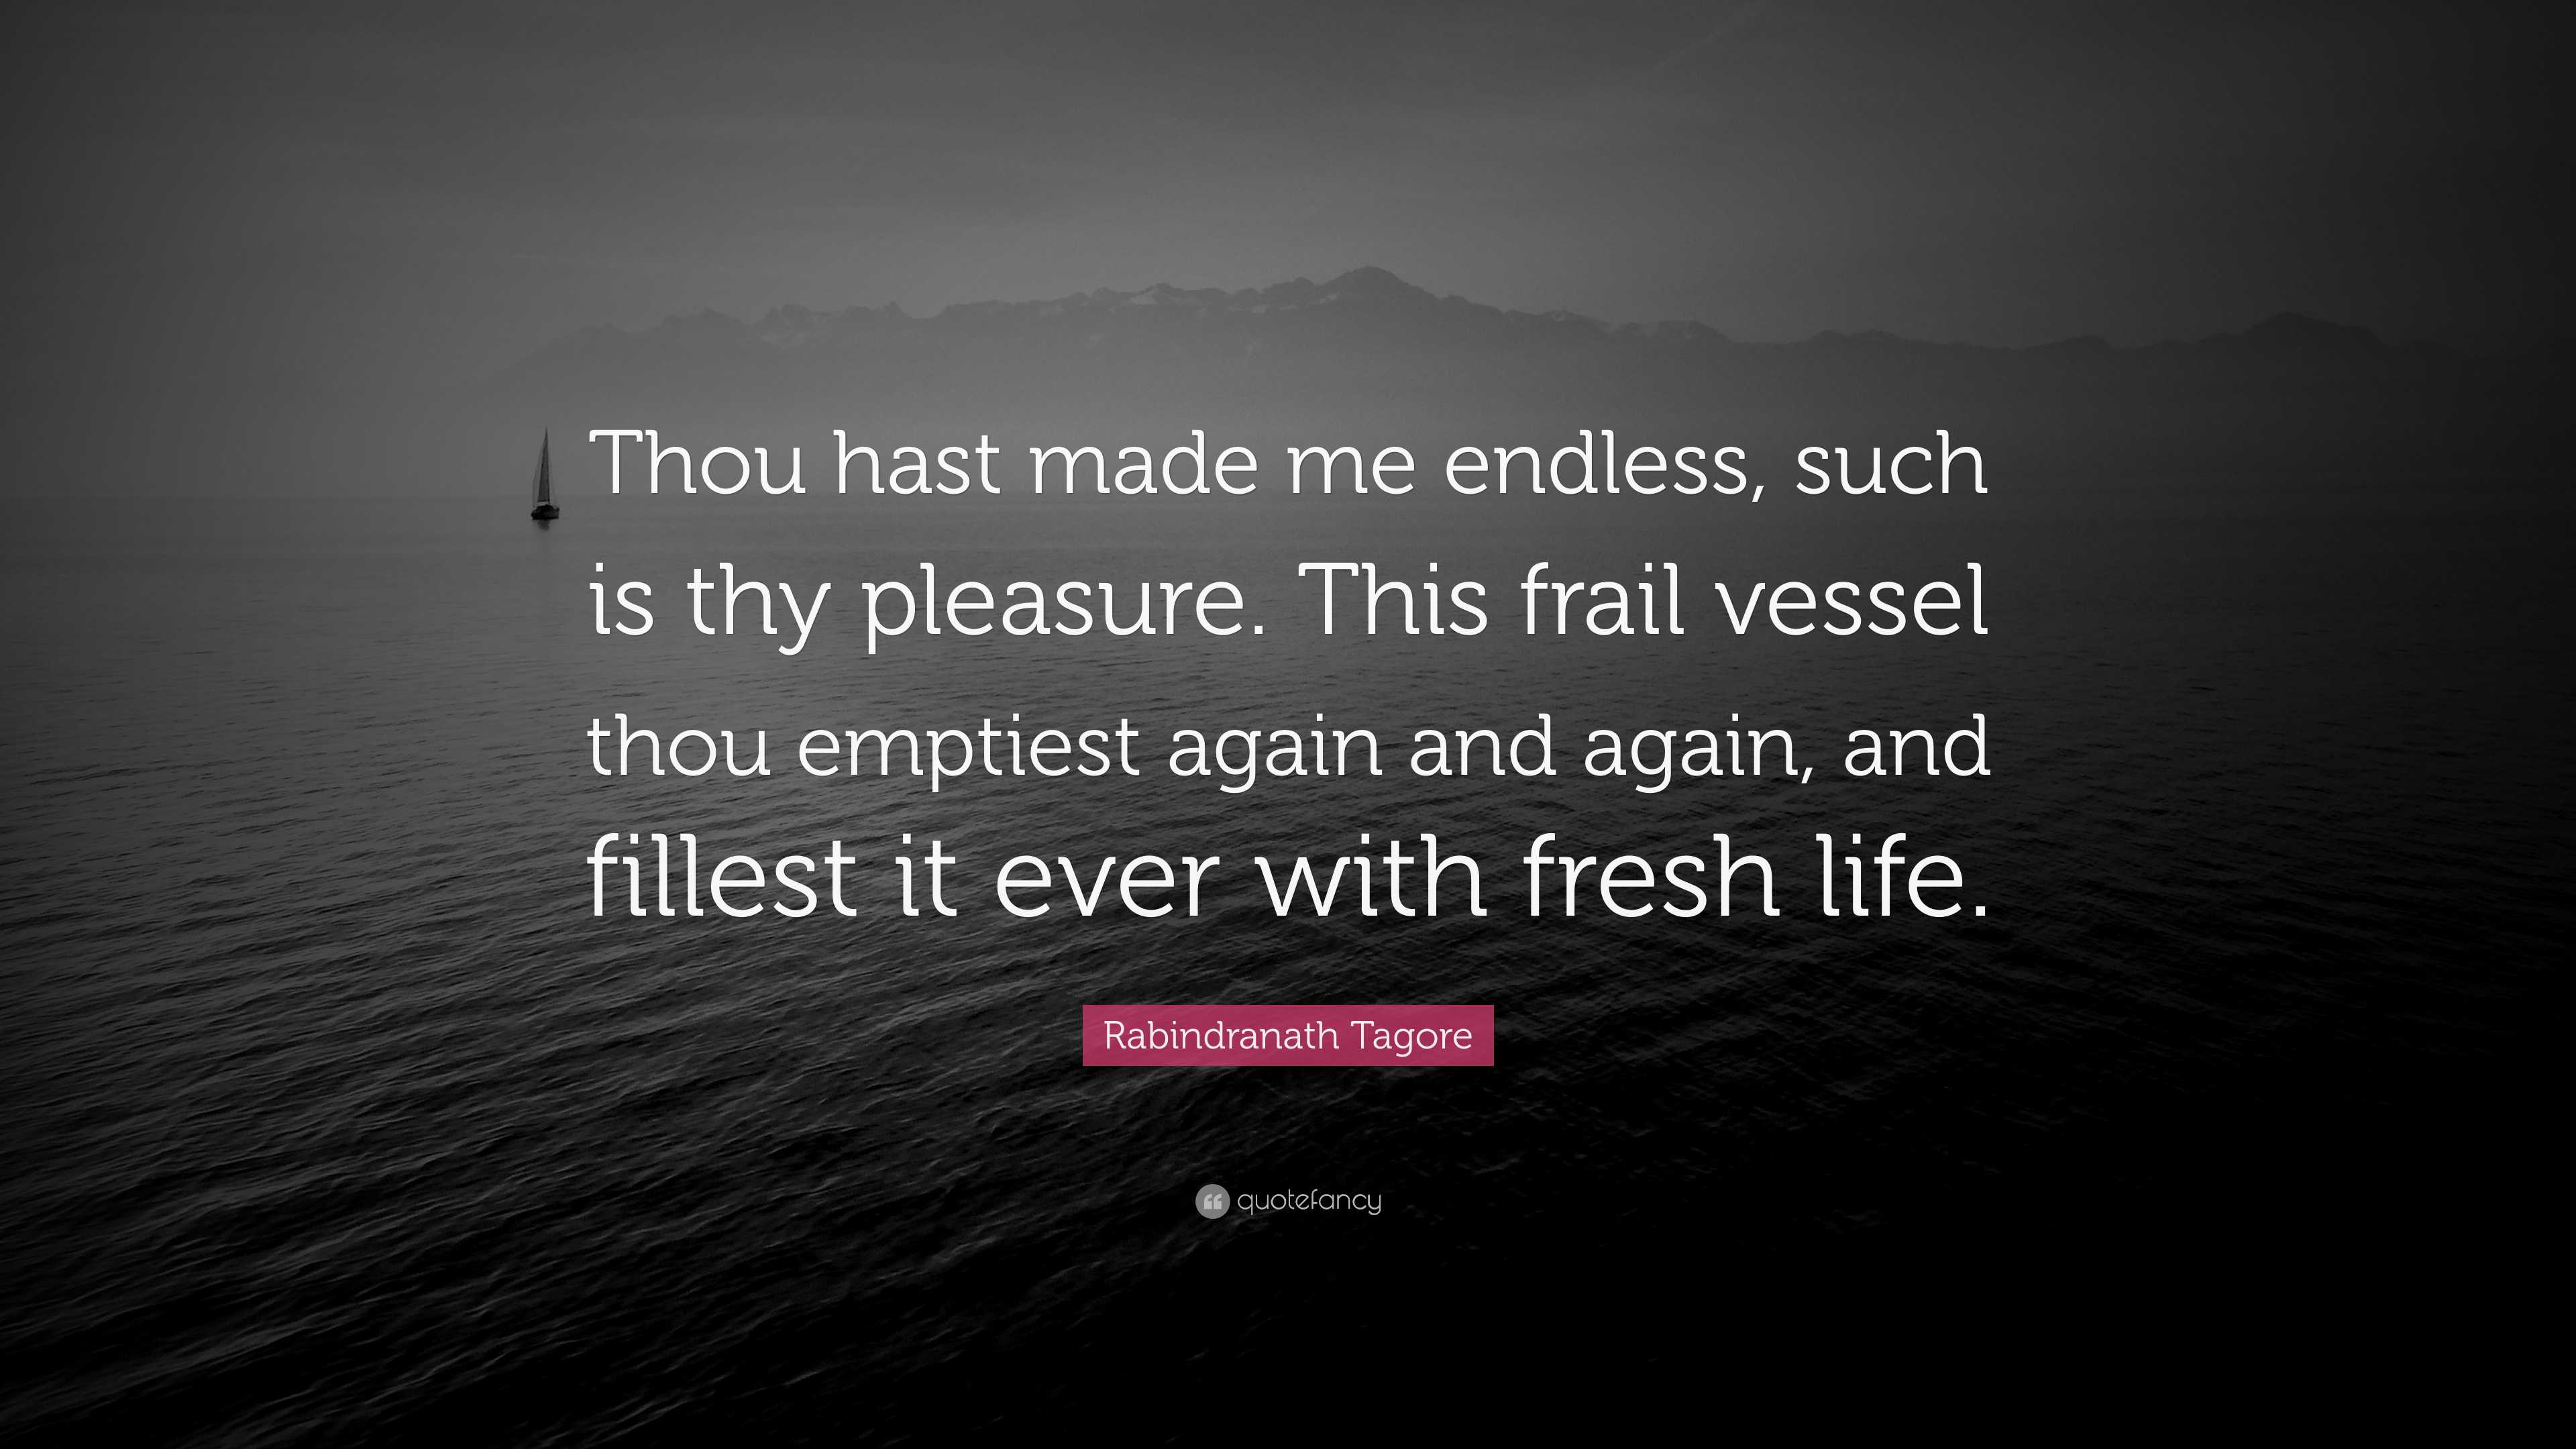 Rabindranath Tagore Quote: “Thou hast made me endless, such